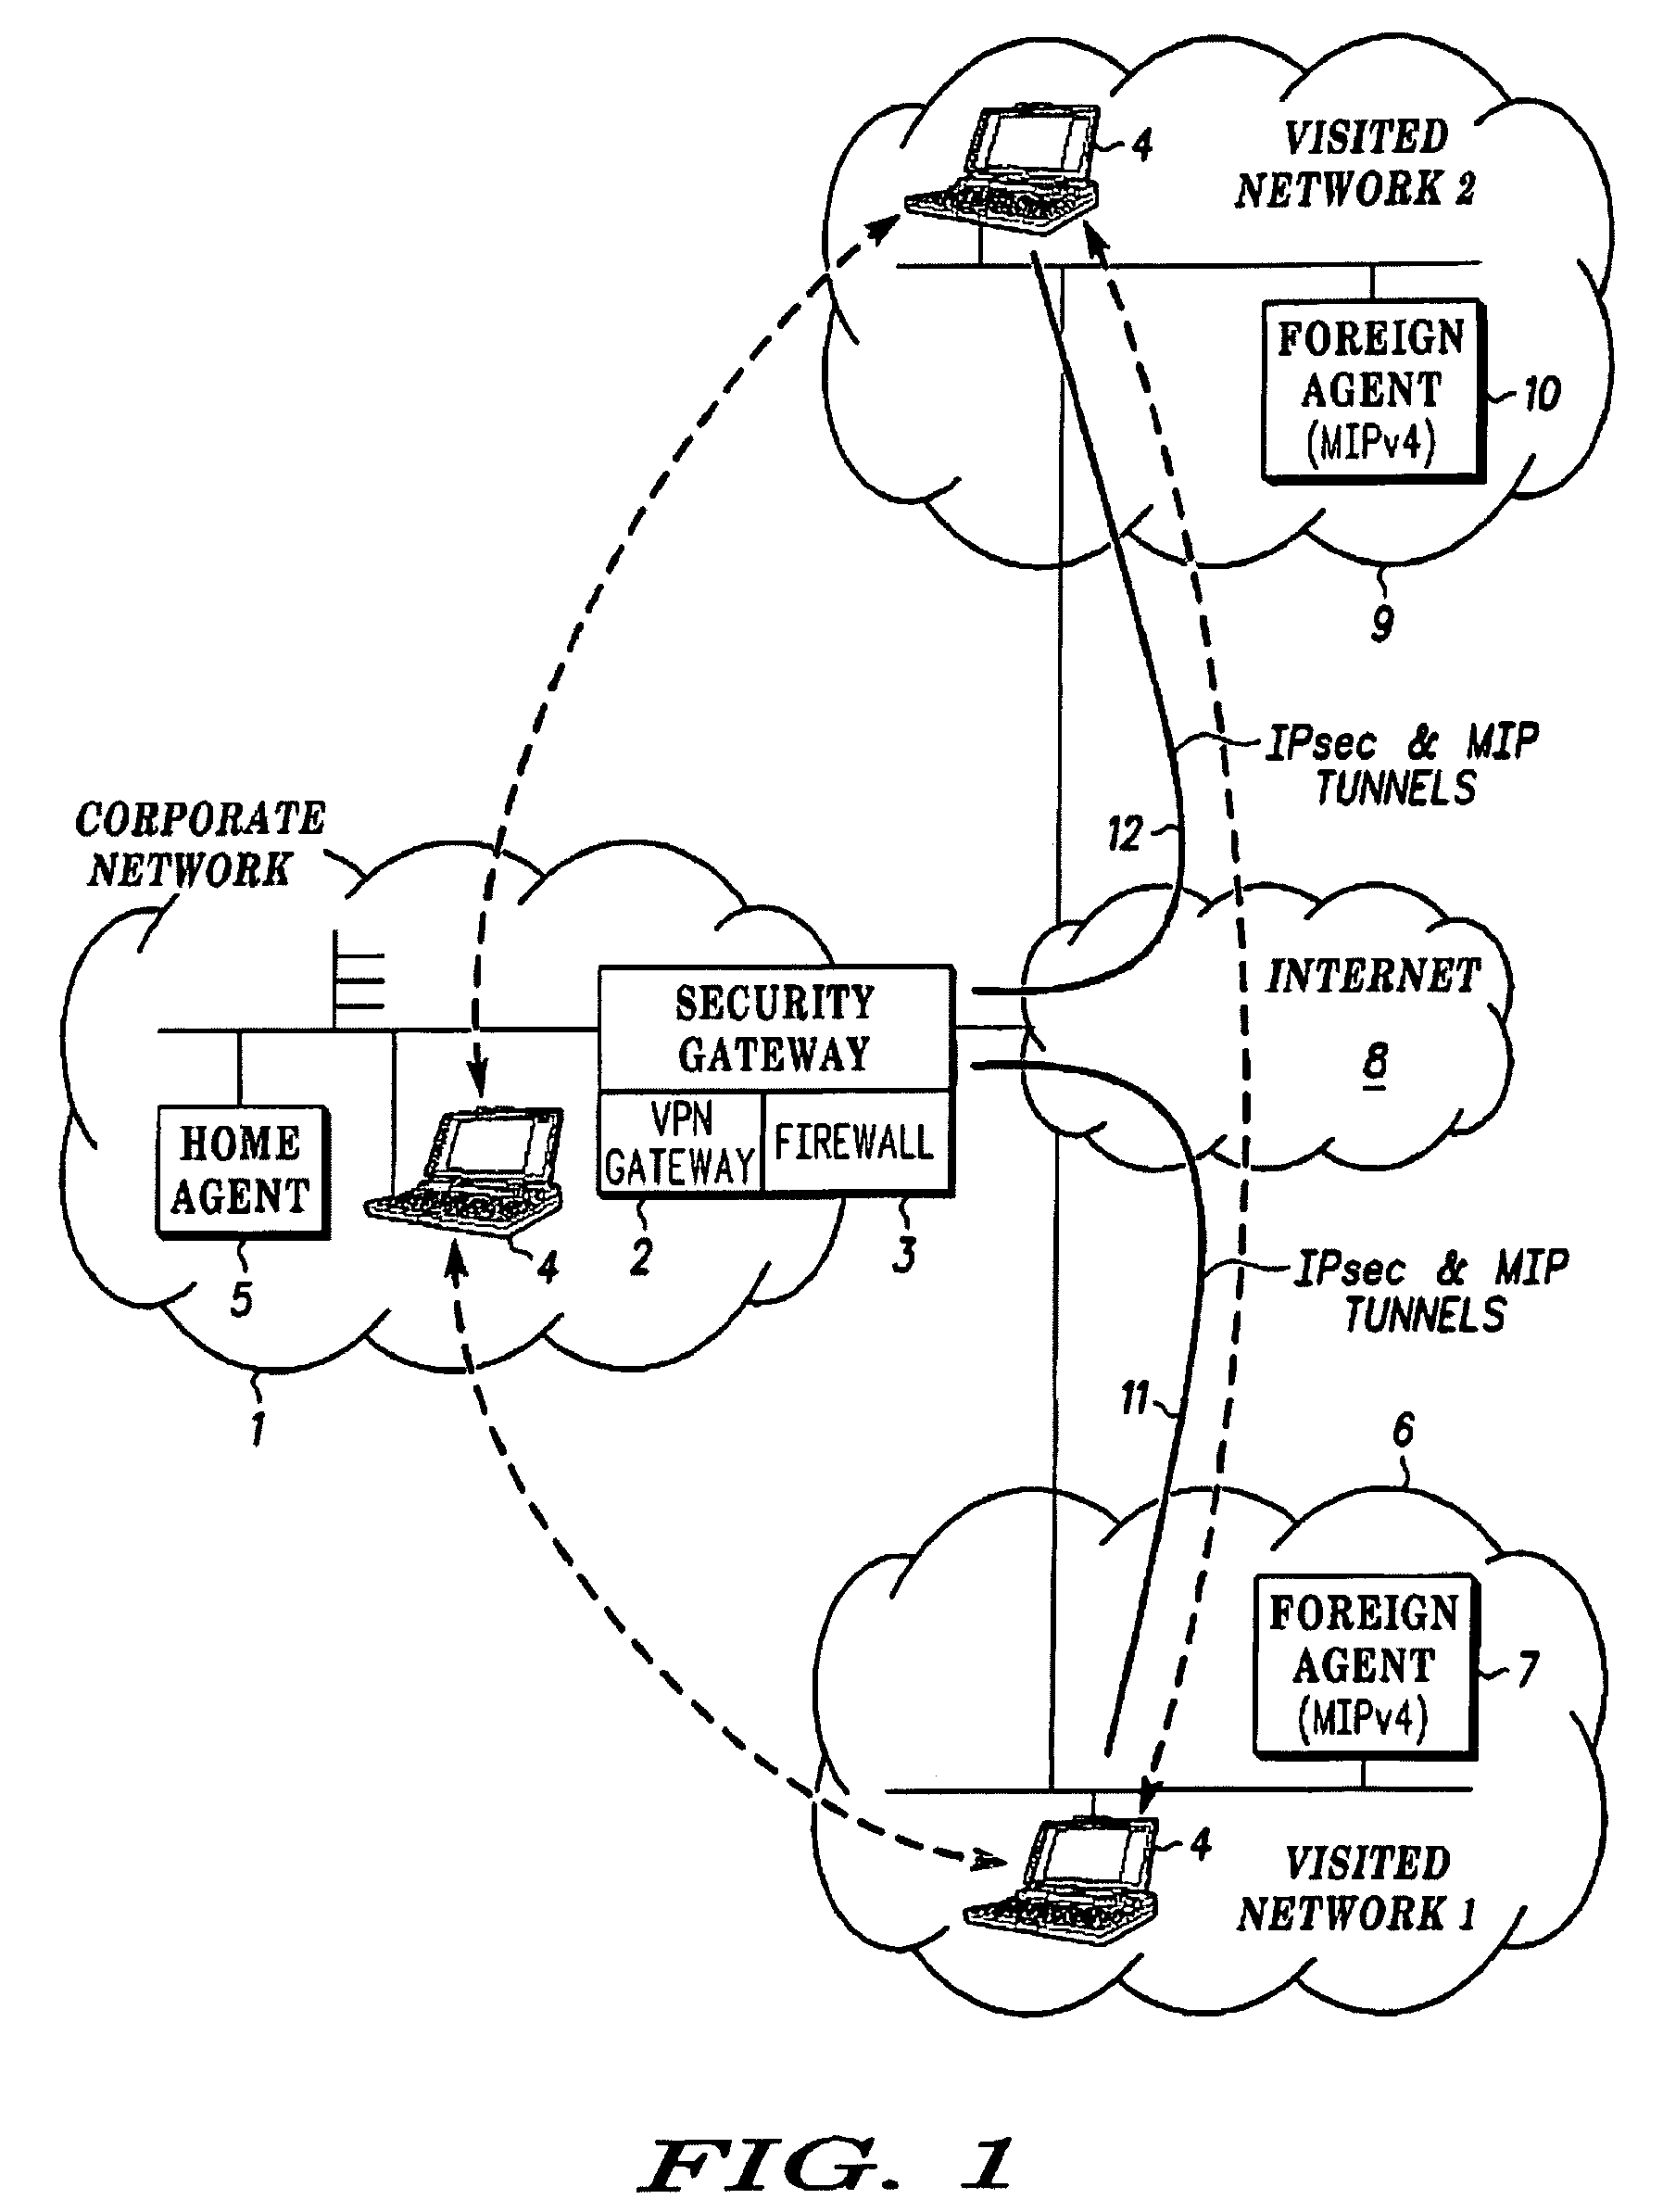 Communication between a private network and a roaming mobile terminal